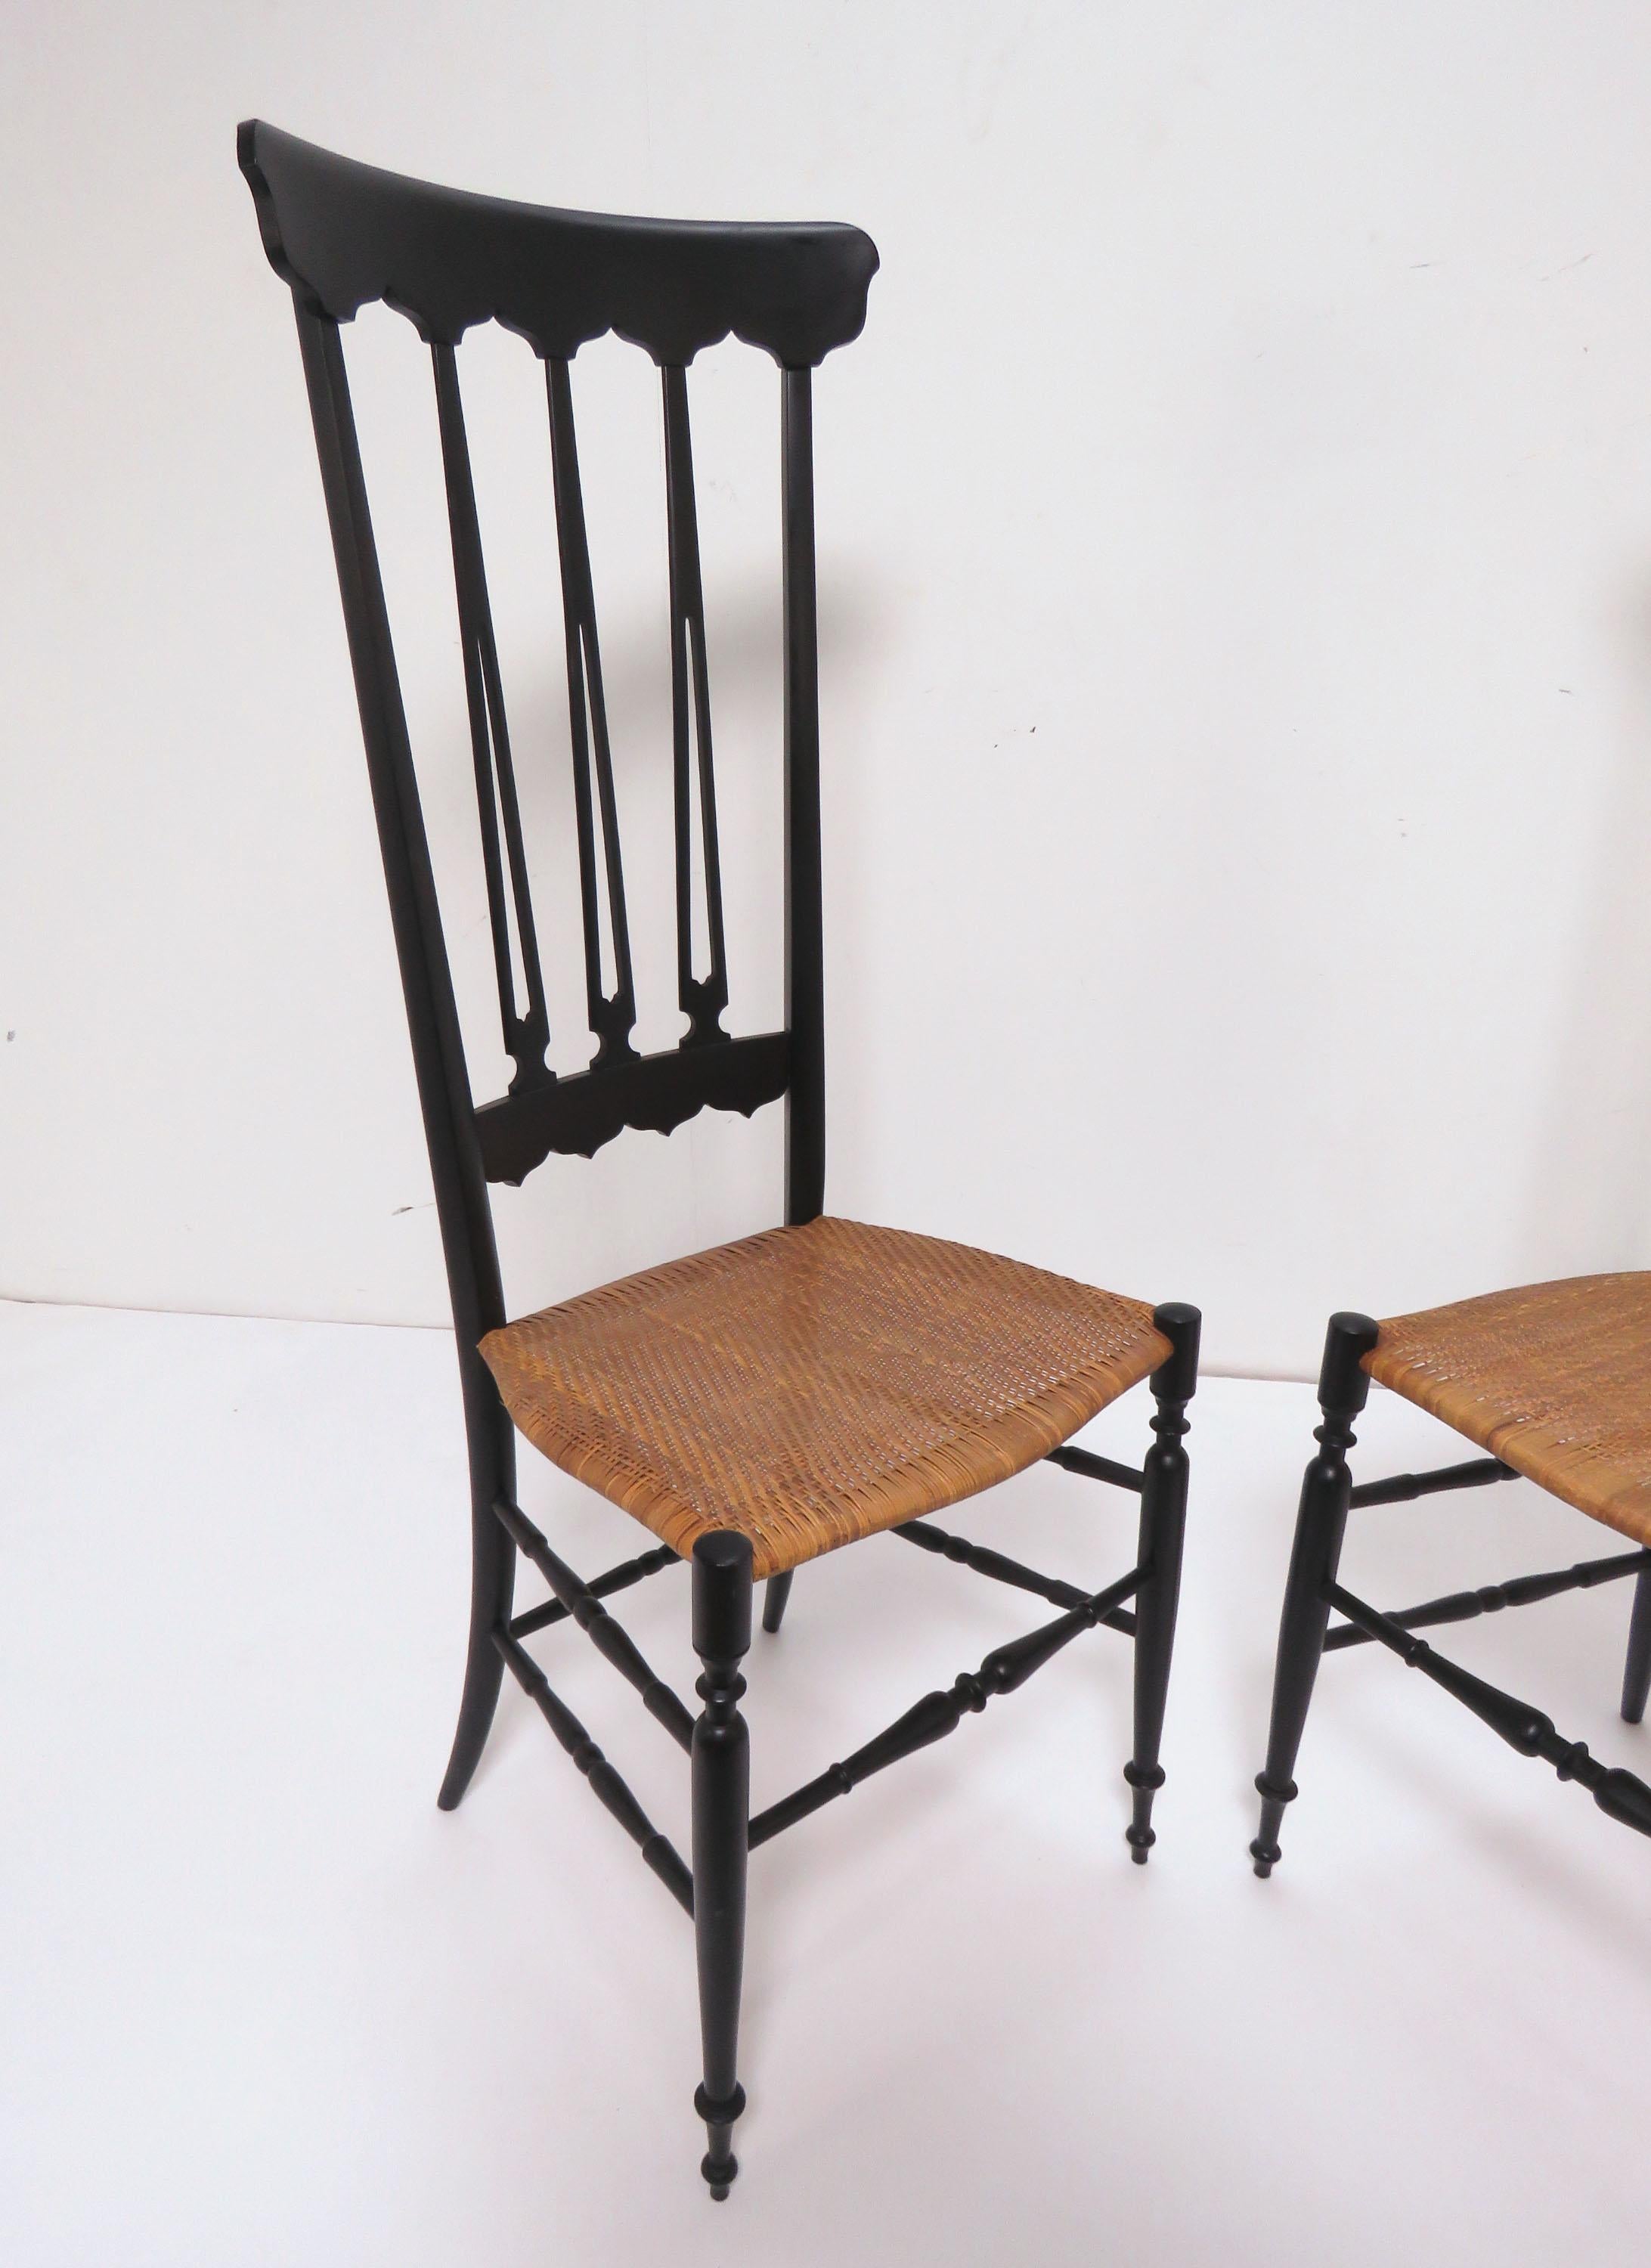 Pair of high back Chiavari chairs in original lacquer with finely carved seat backs, exquisitely turned legs and stretchers, and finely caned seats, made in Italy, circa 1960s. This style of lightweight decorative chair originated in the town of